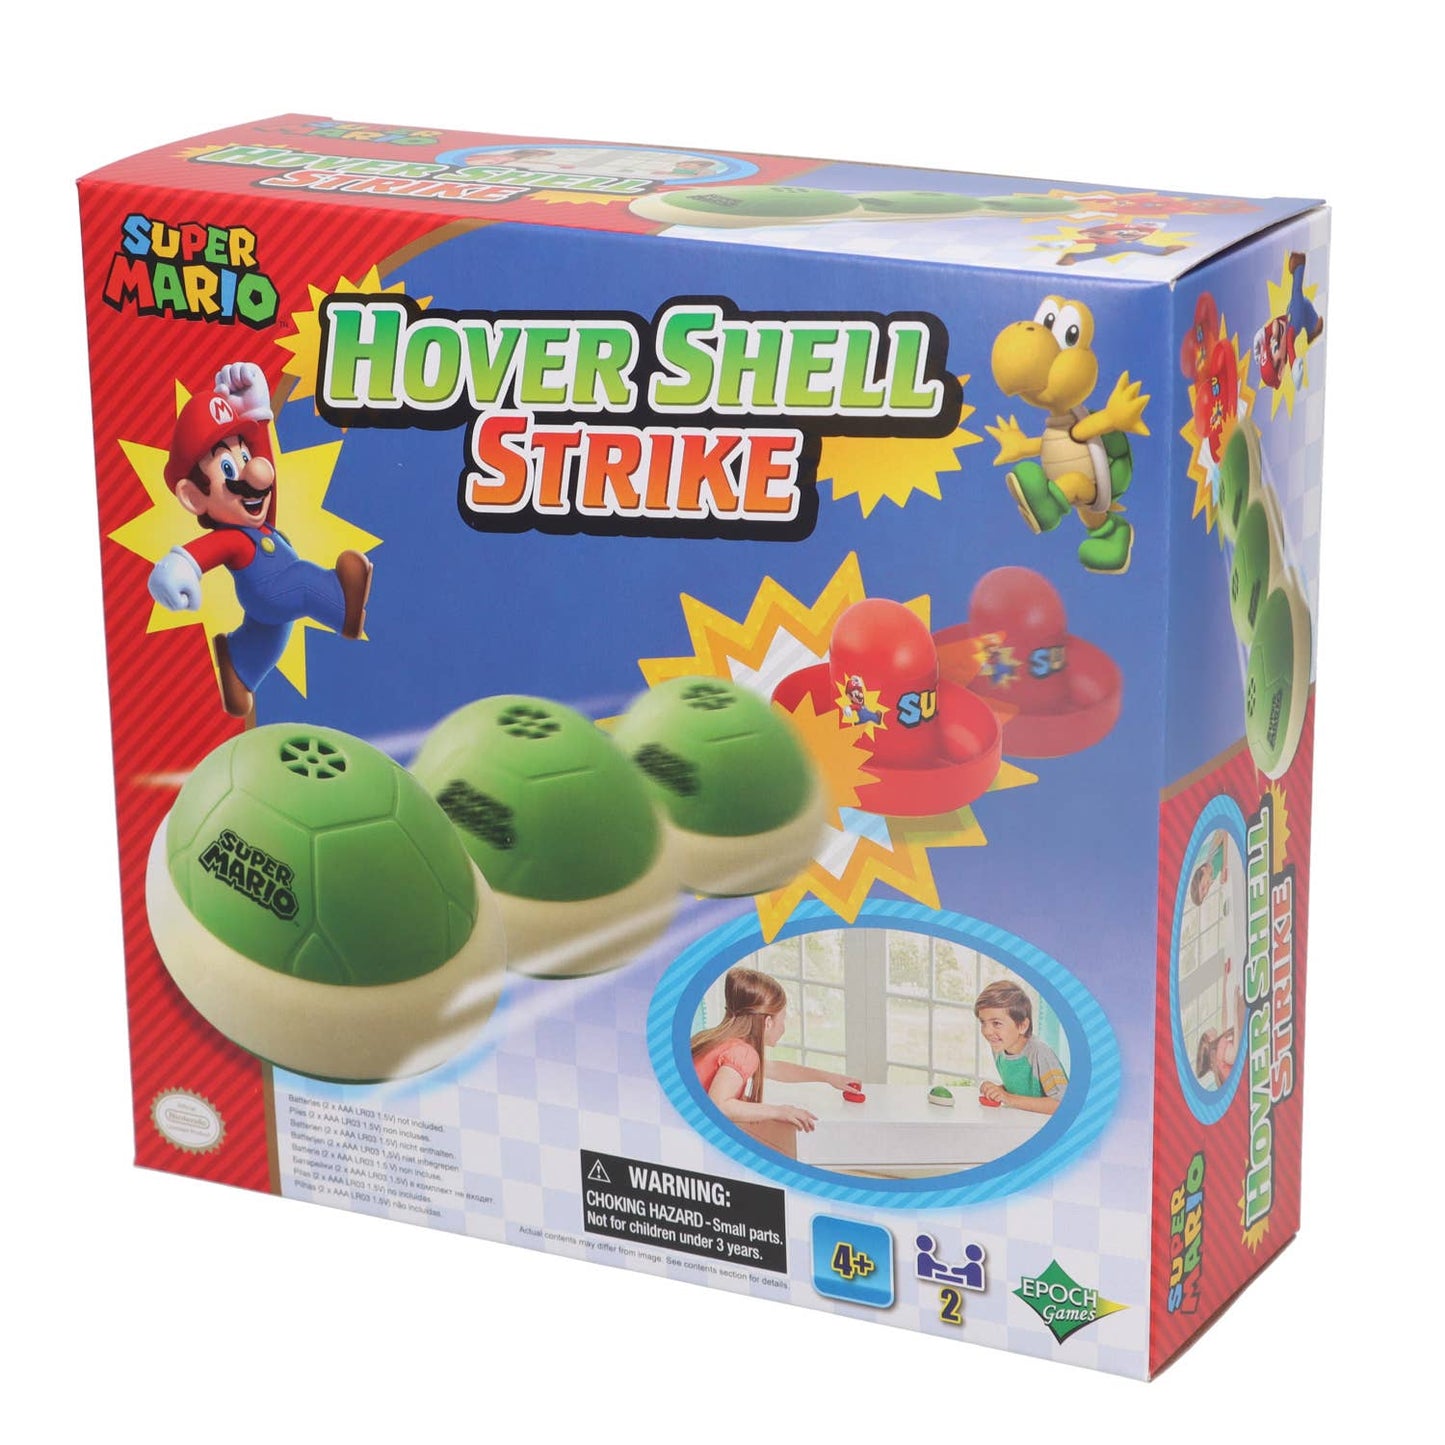 Super Mario Hover Shell Strike,Tabletop or Floor Action Game